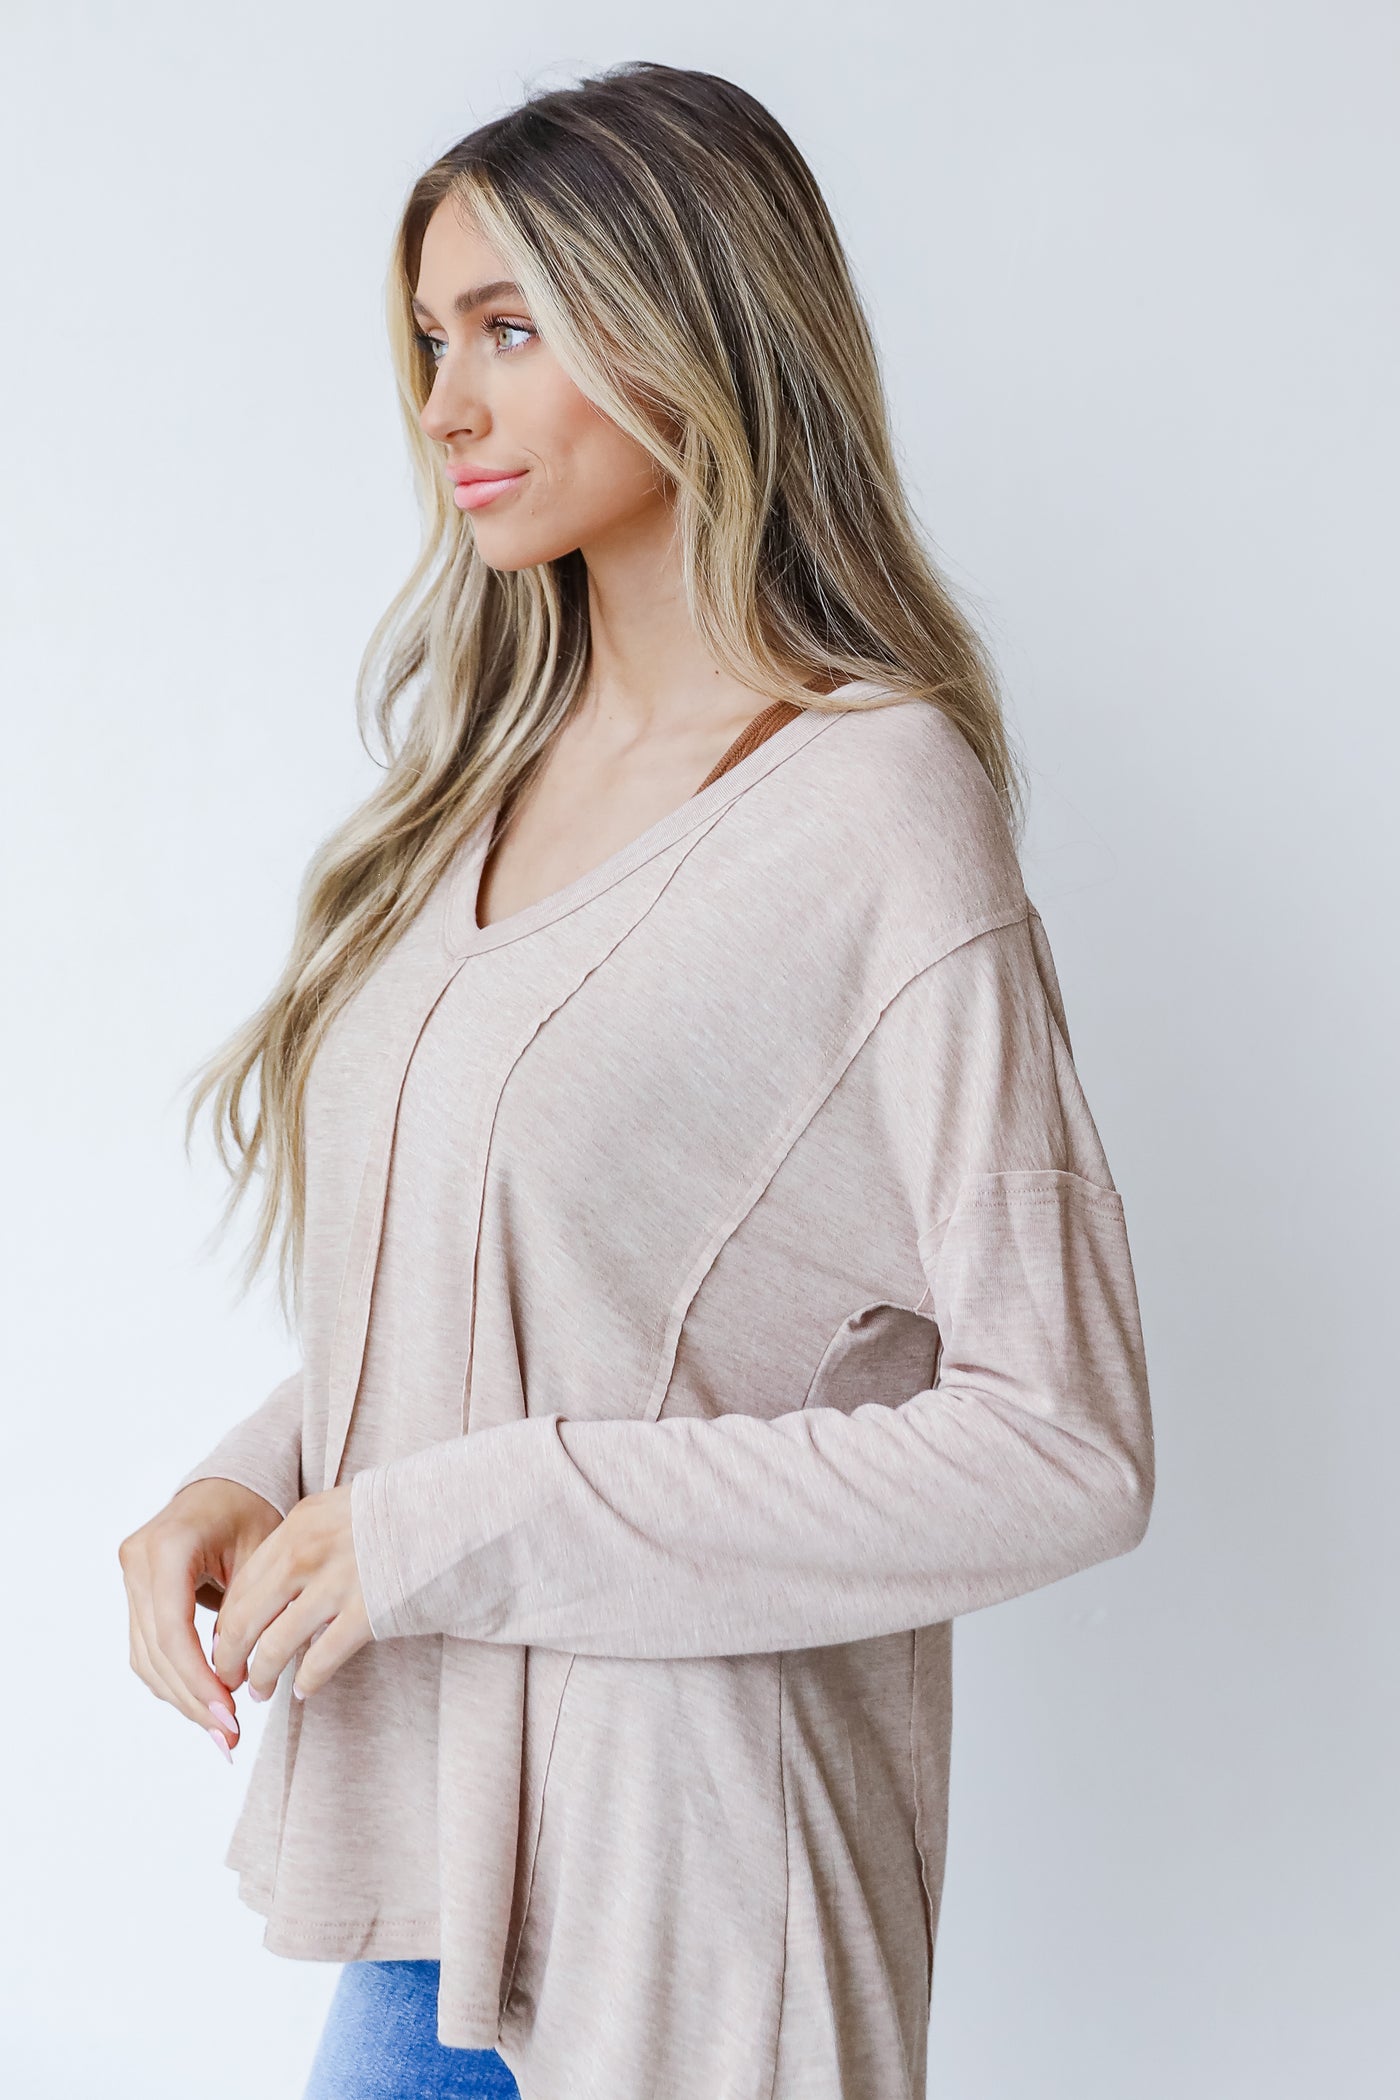 Jersey Knit Top in taupe side view